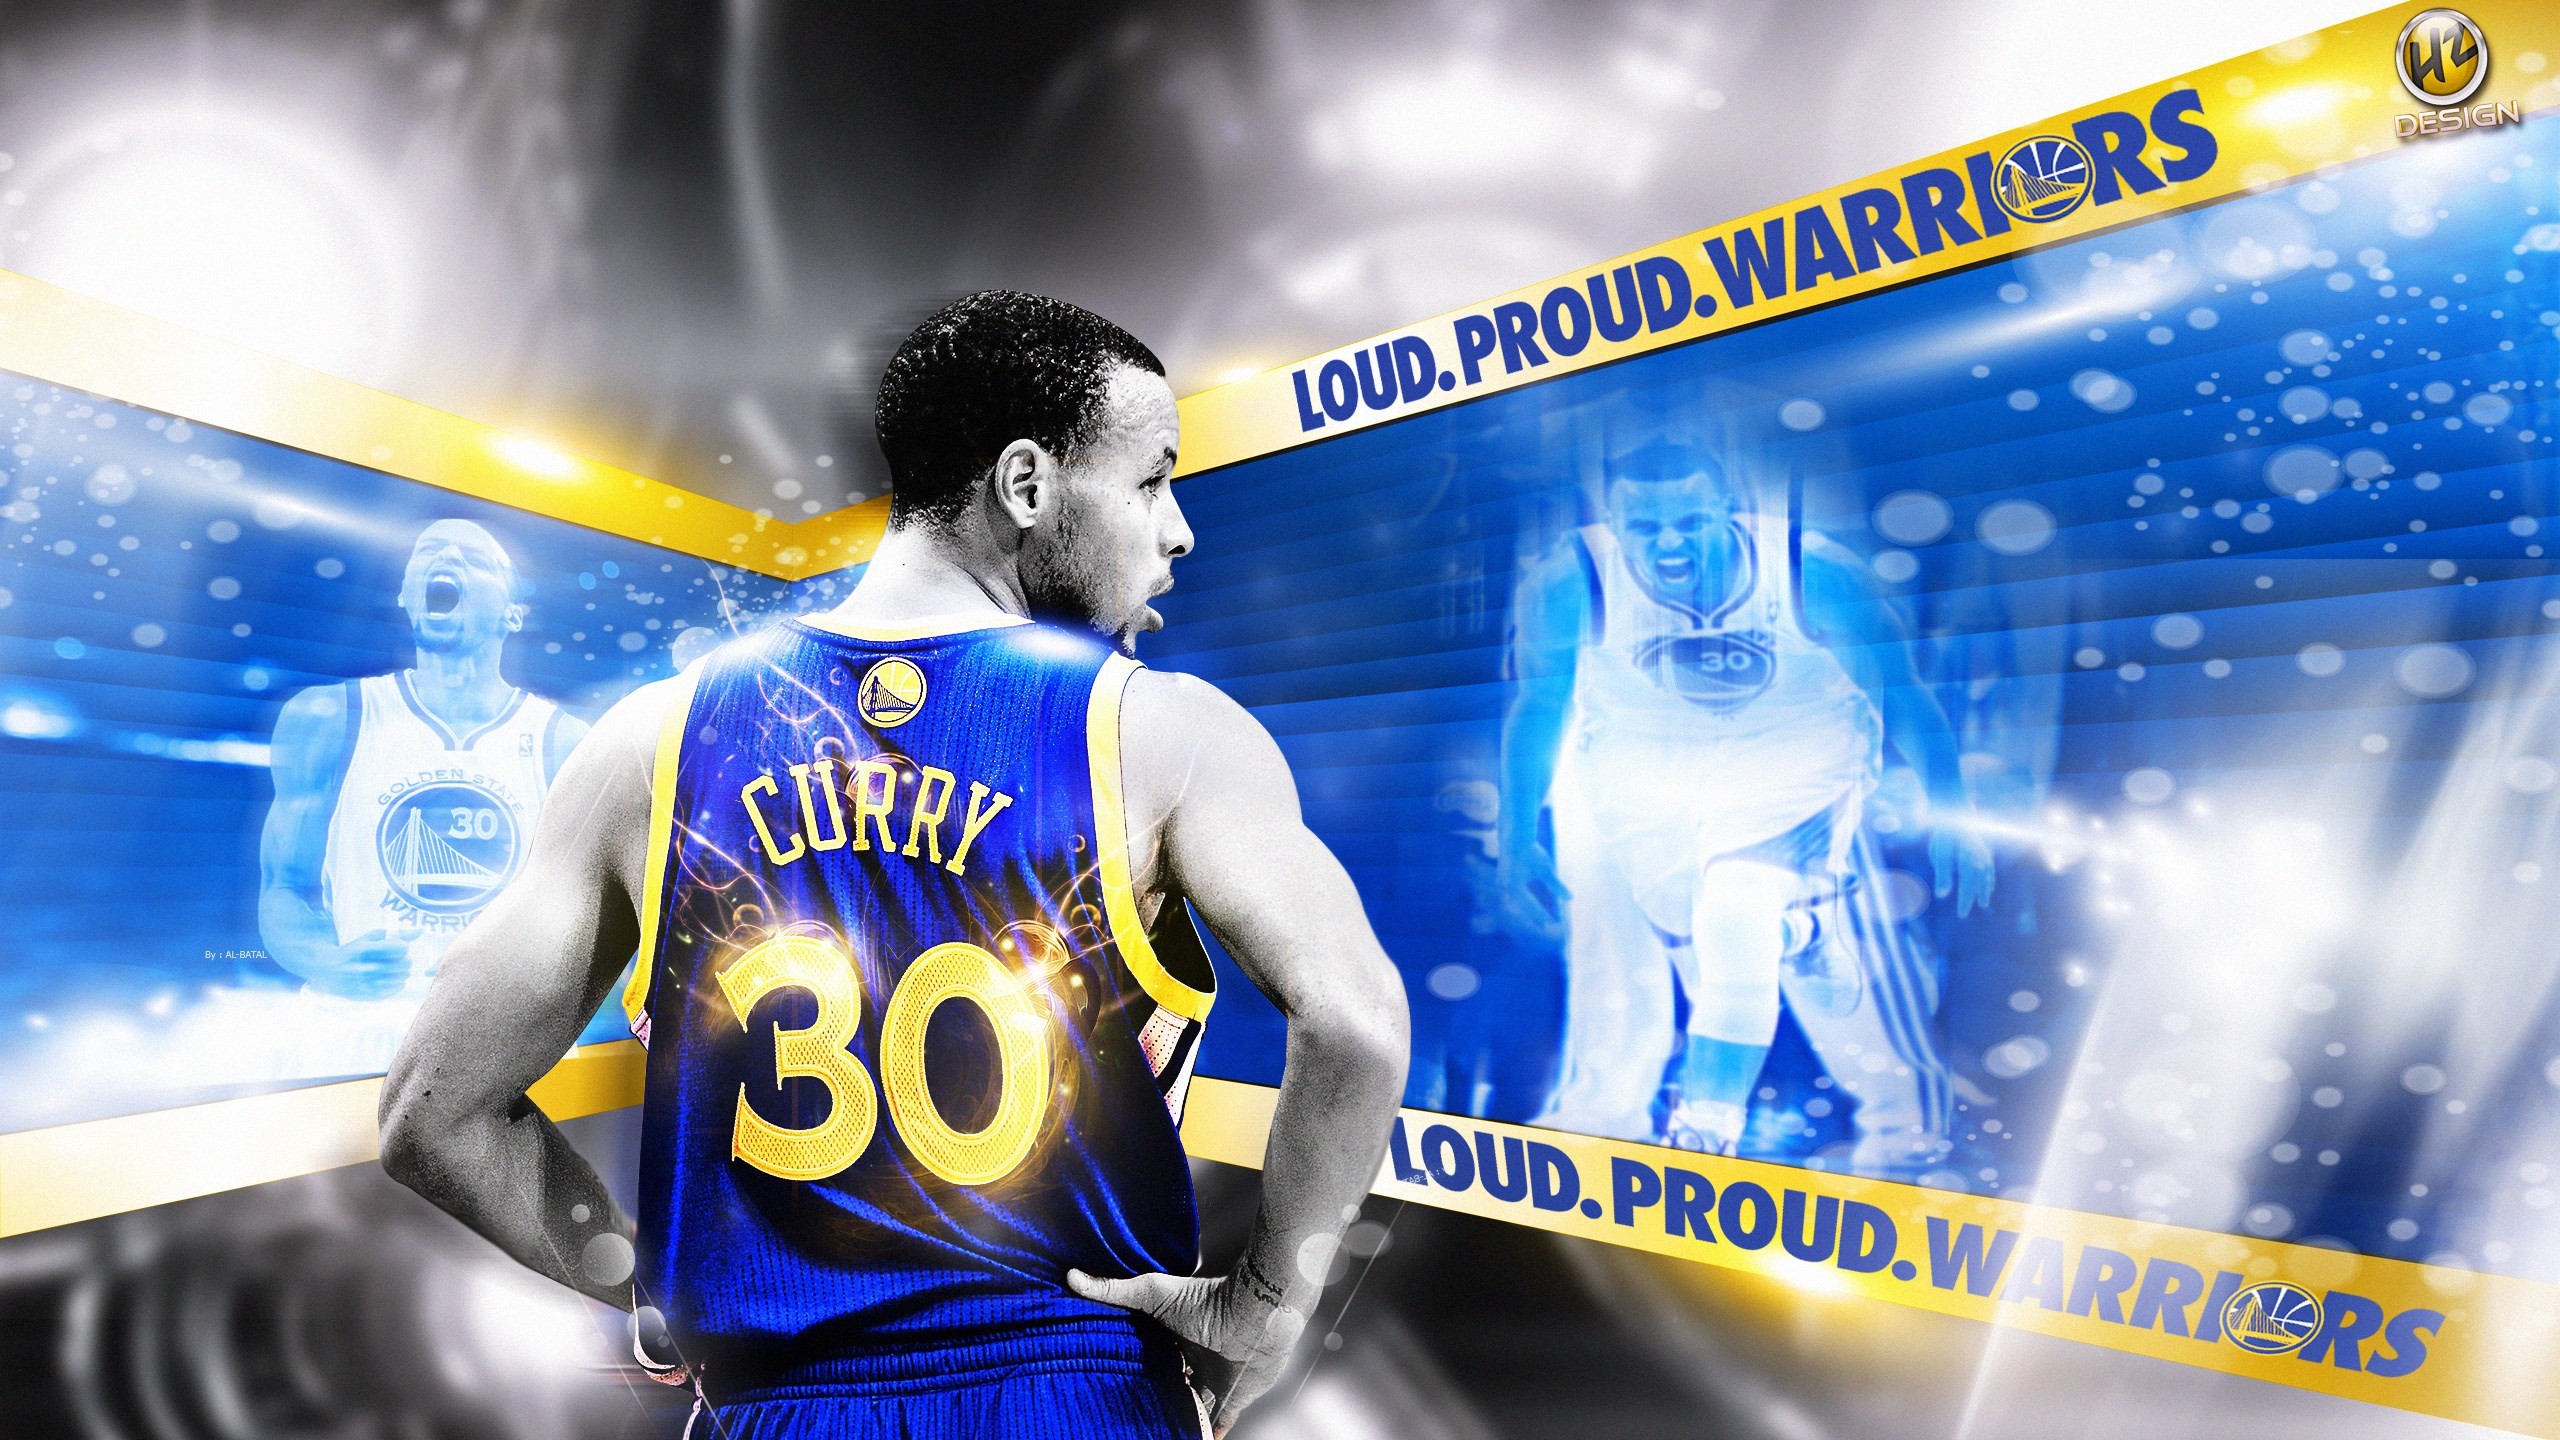 2560x1440 stephen curry wallpaper for mac computers by Dudley Fairy (2017-03-07)